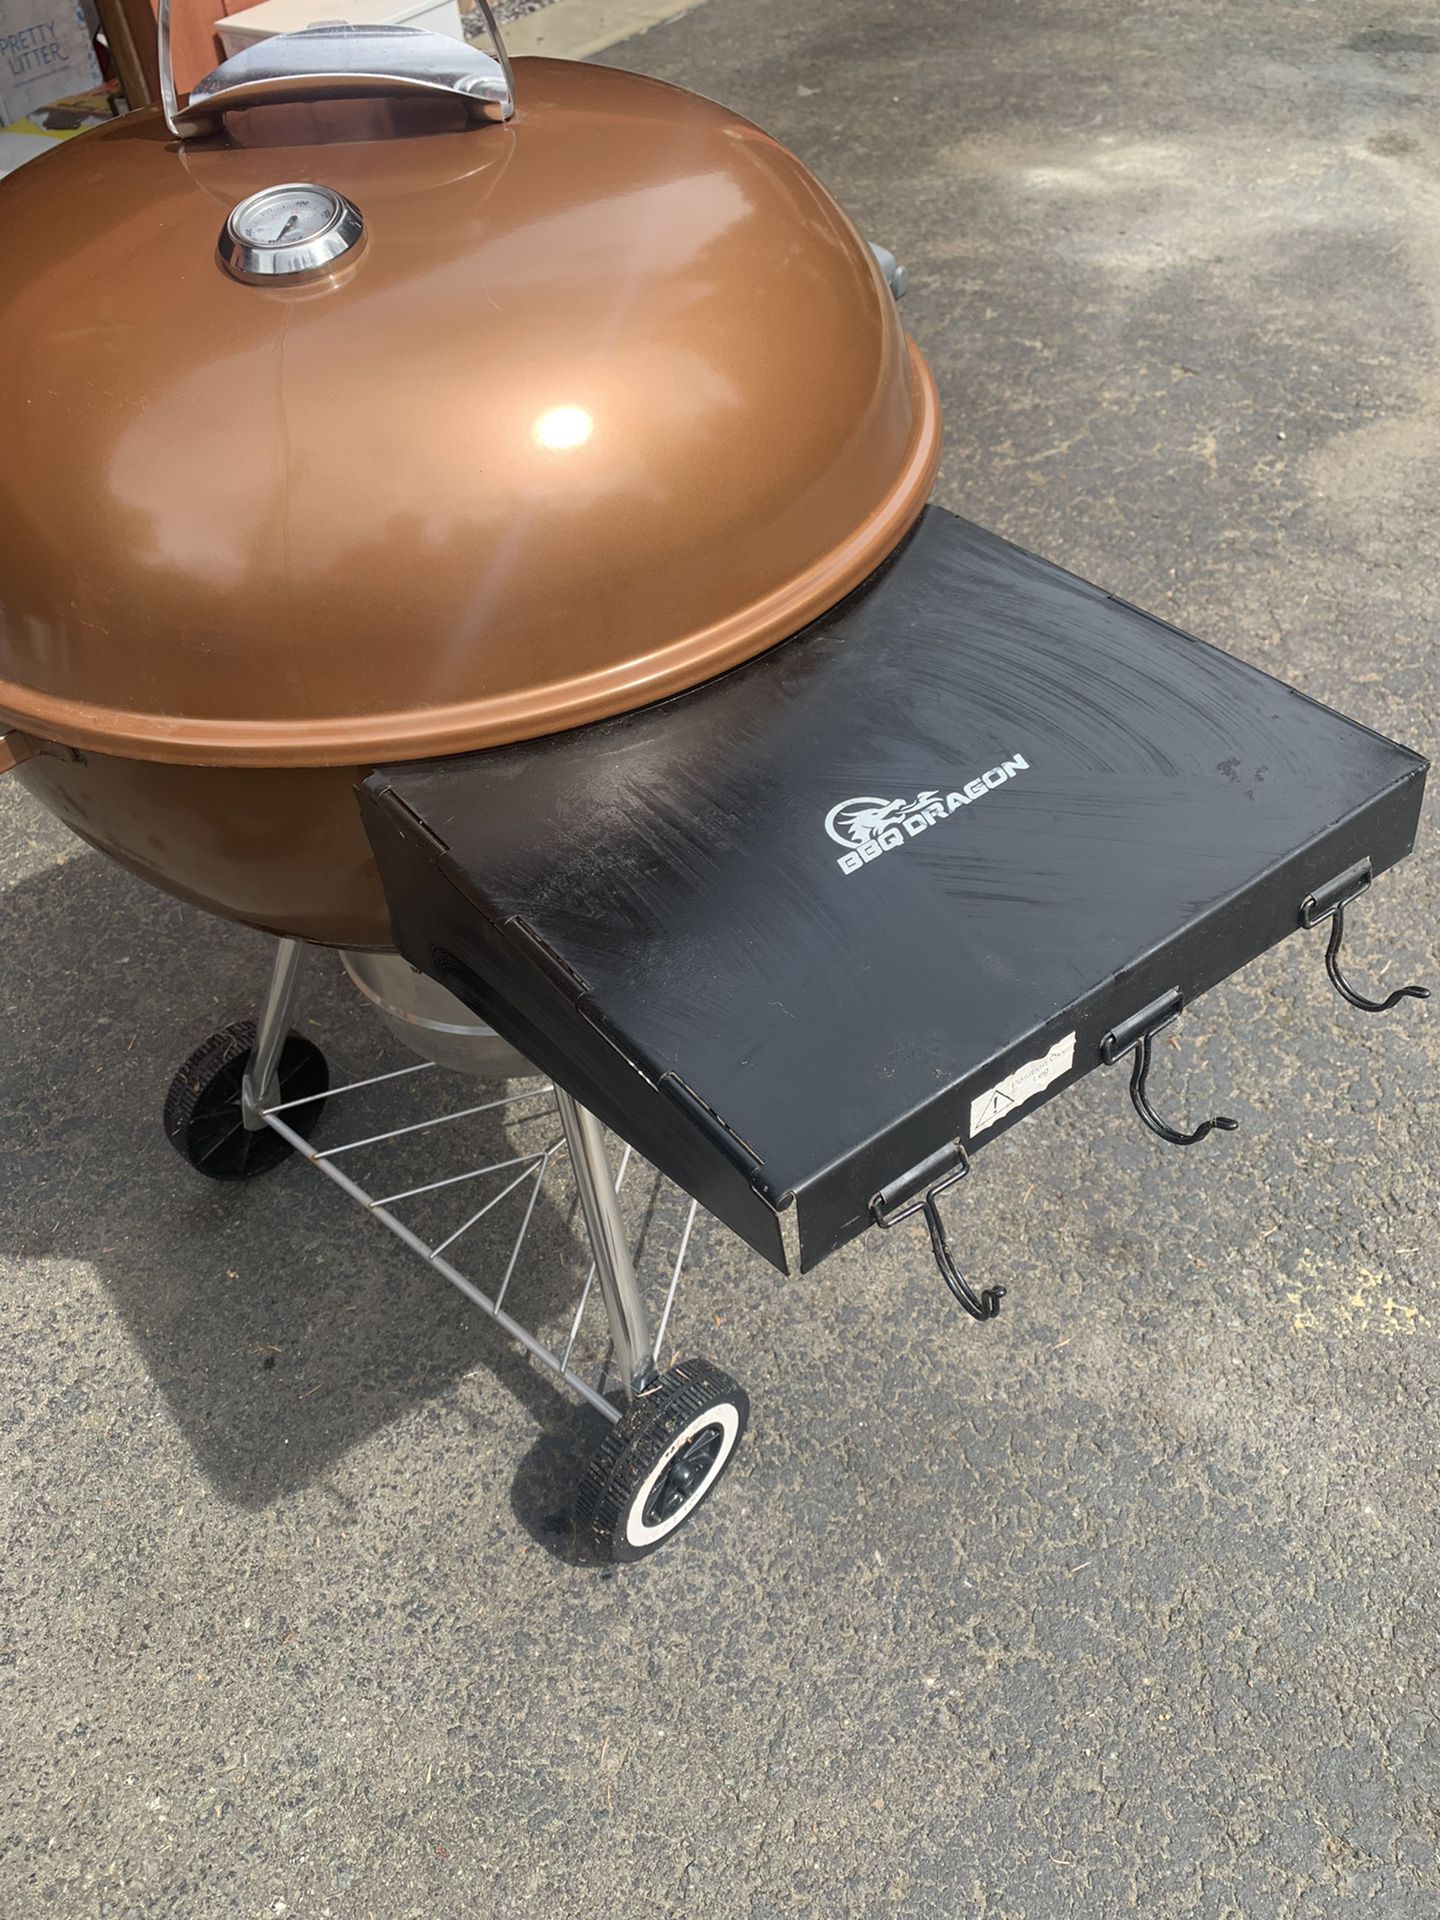 3 In One Grill/griddle Hamilton Beach for Sale in Renton, WA - OfferUp